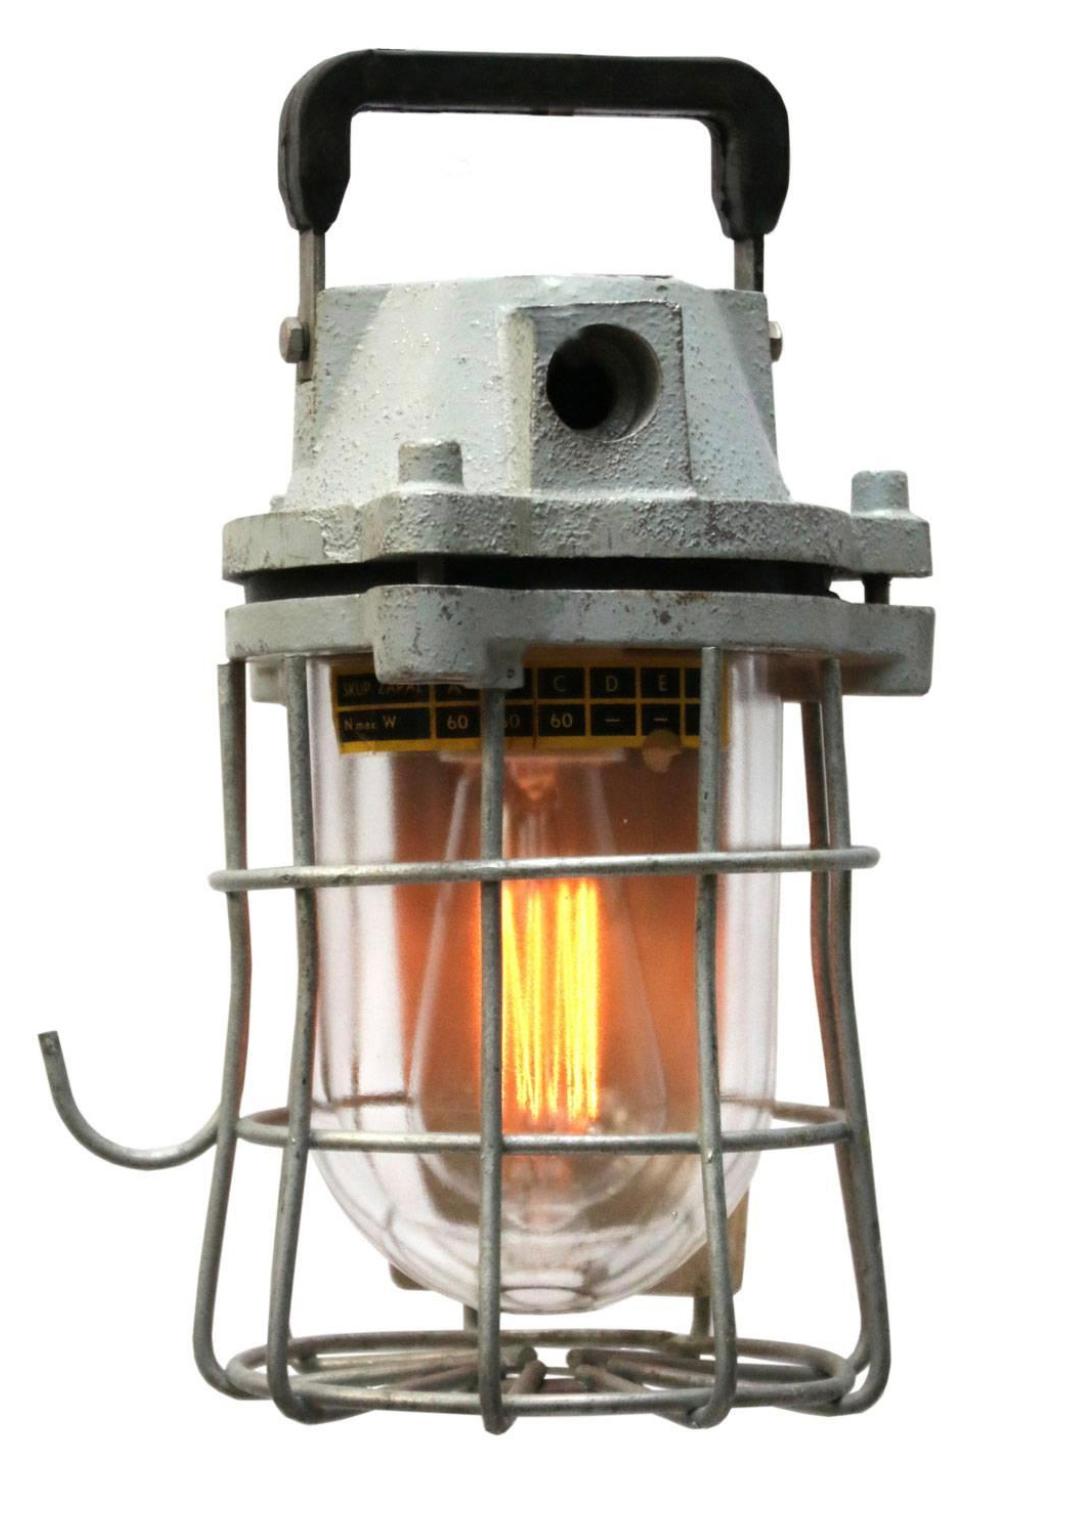 Midcentury European industrial mining cage lighting.

Original good condition, great patina!

Weight 4.0 kg / 8.8 lb
Size: H 13.5 in. x Dm 7 in.

48 x on stock.
  